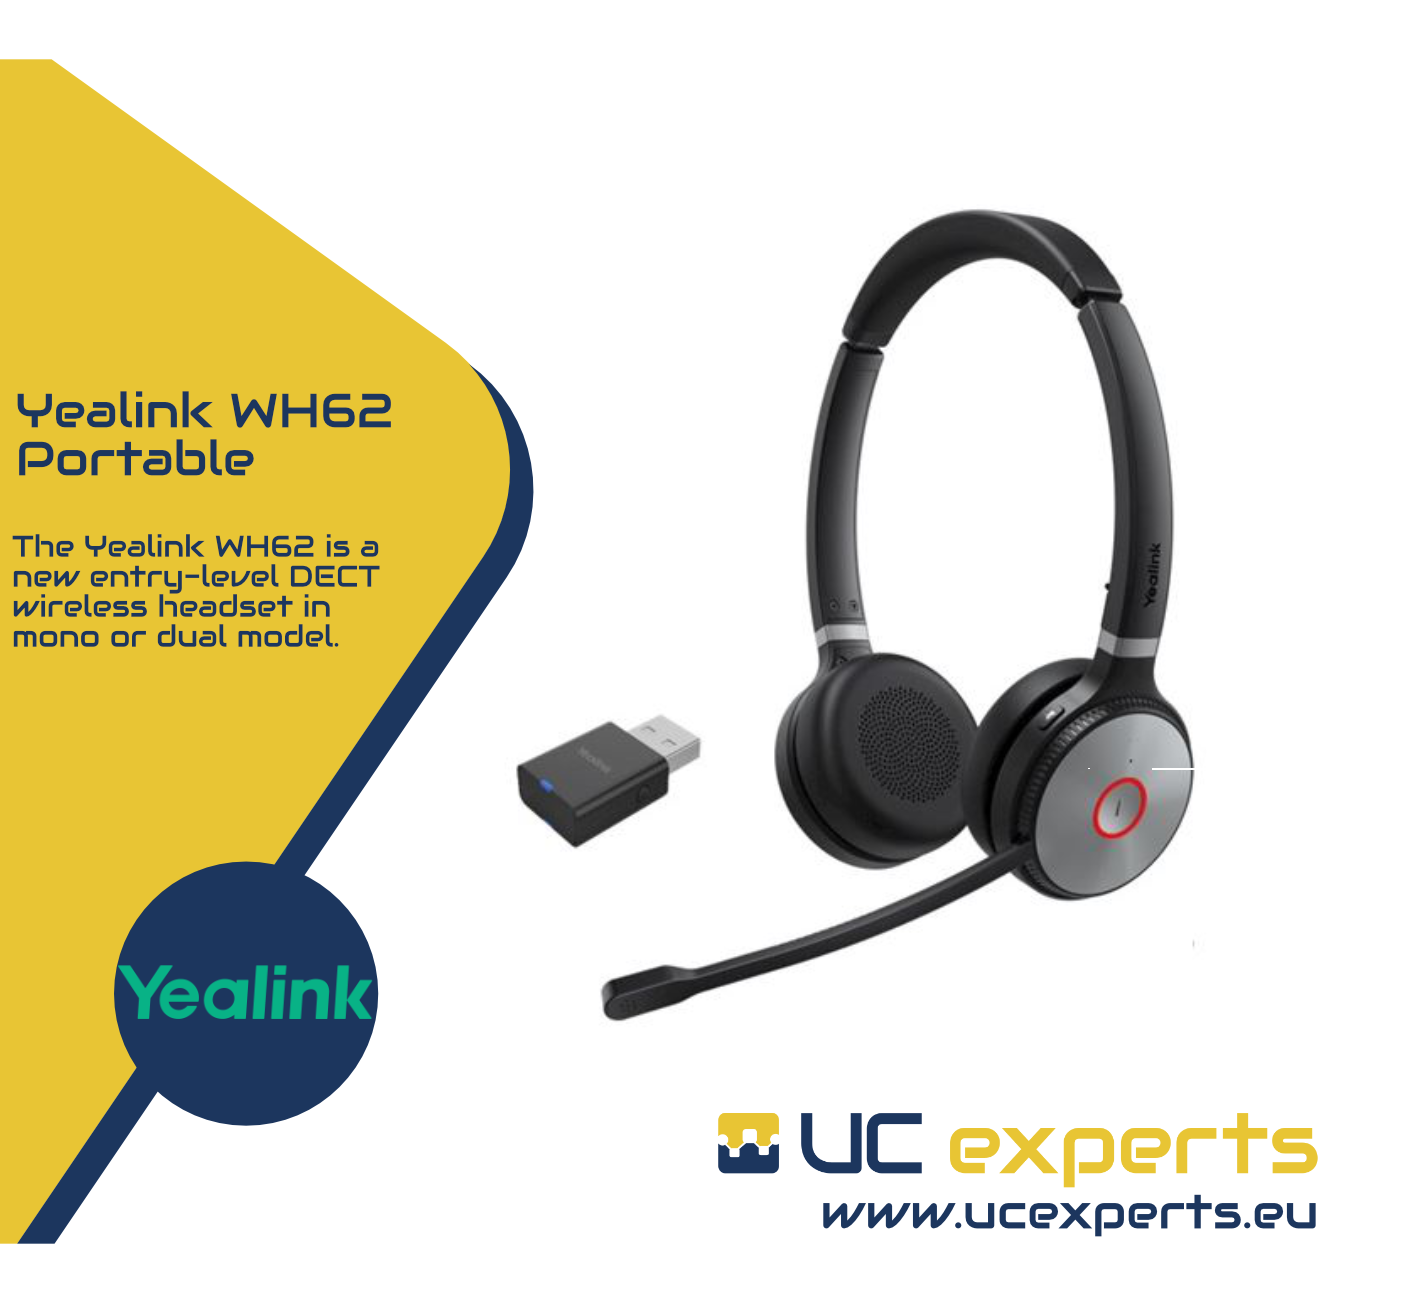 Yealink WH62 Portable